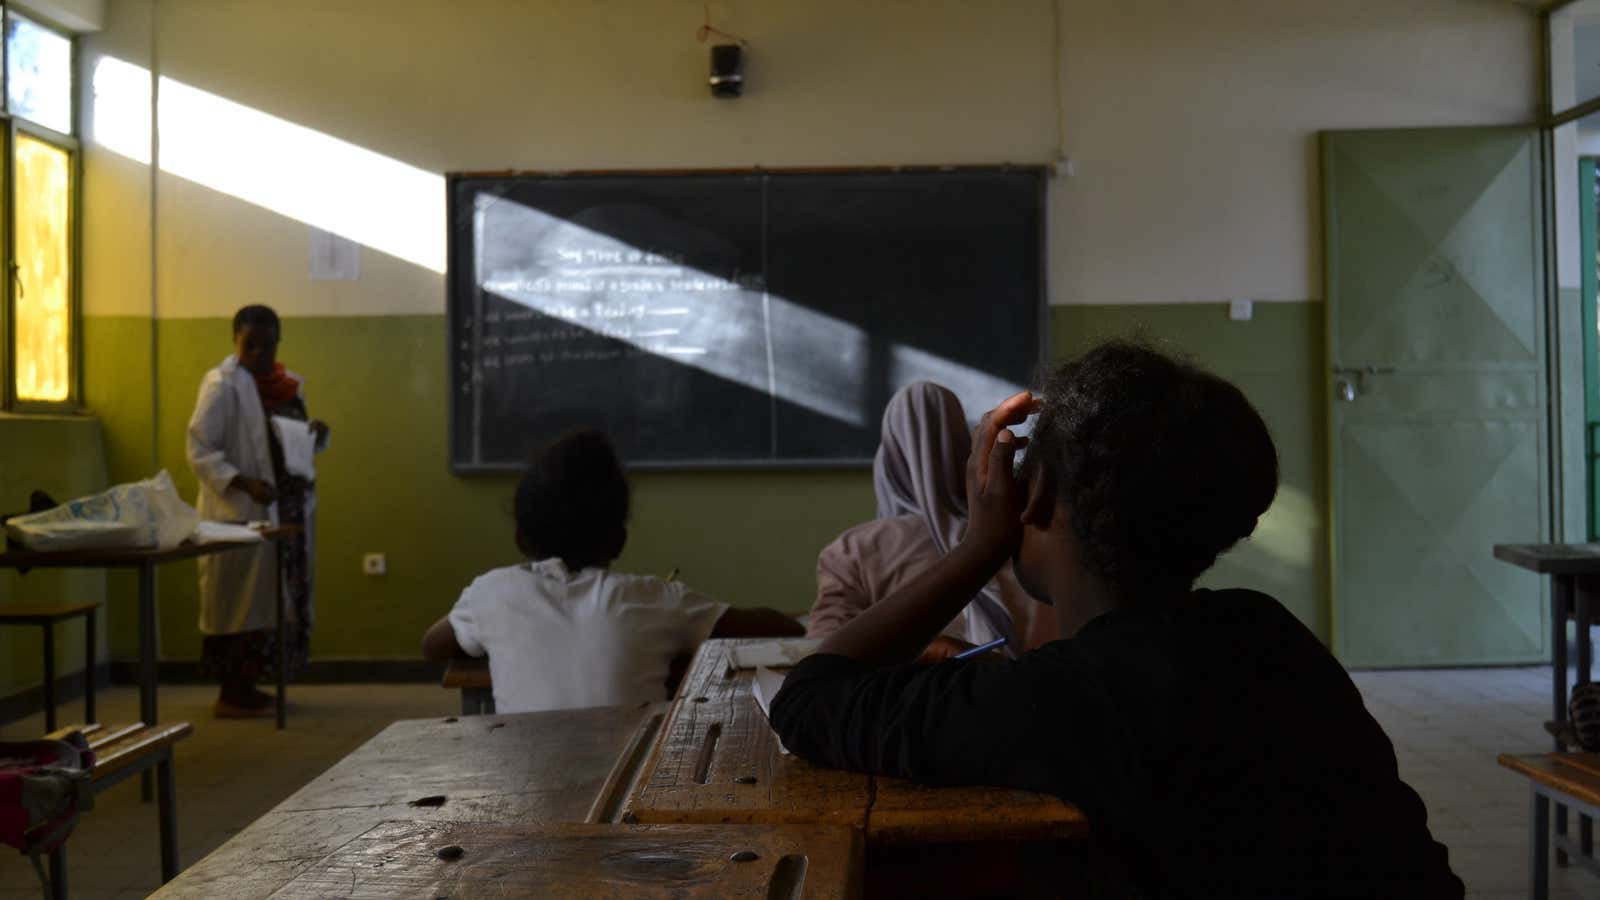 5 million students across 3,500 schools in Ethiopia are about to have their educational records stored on a blockchain.